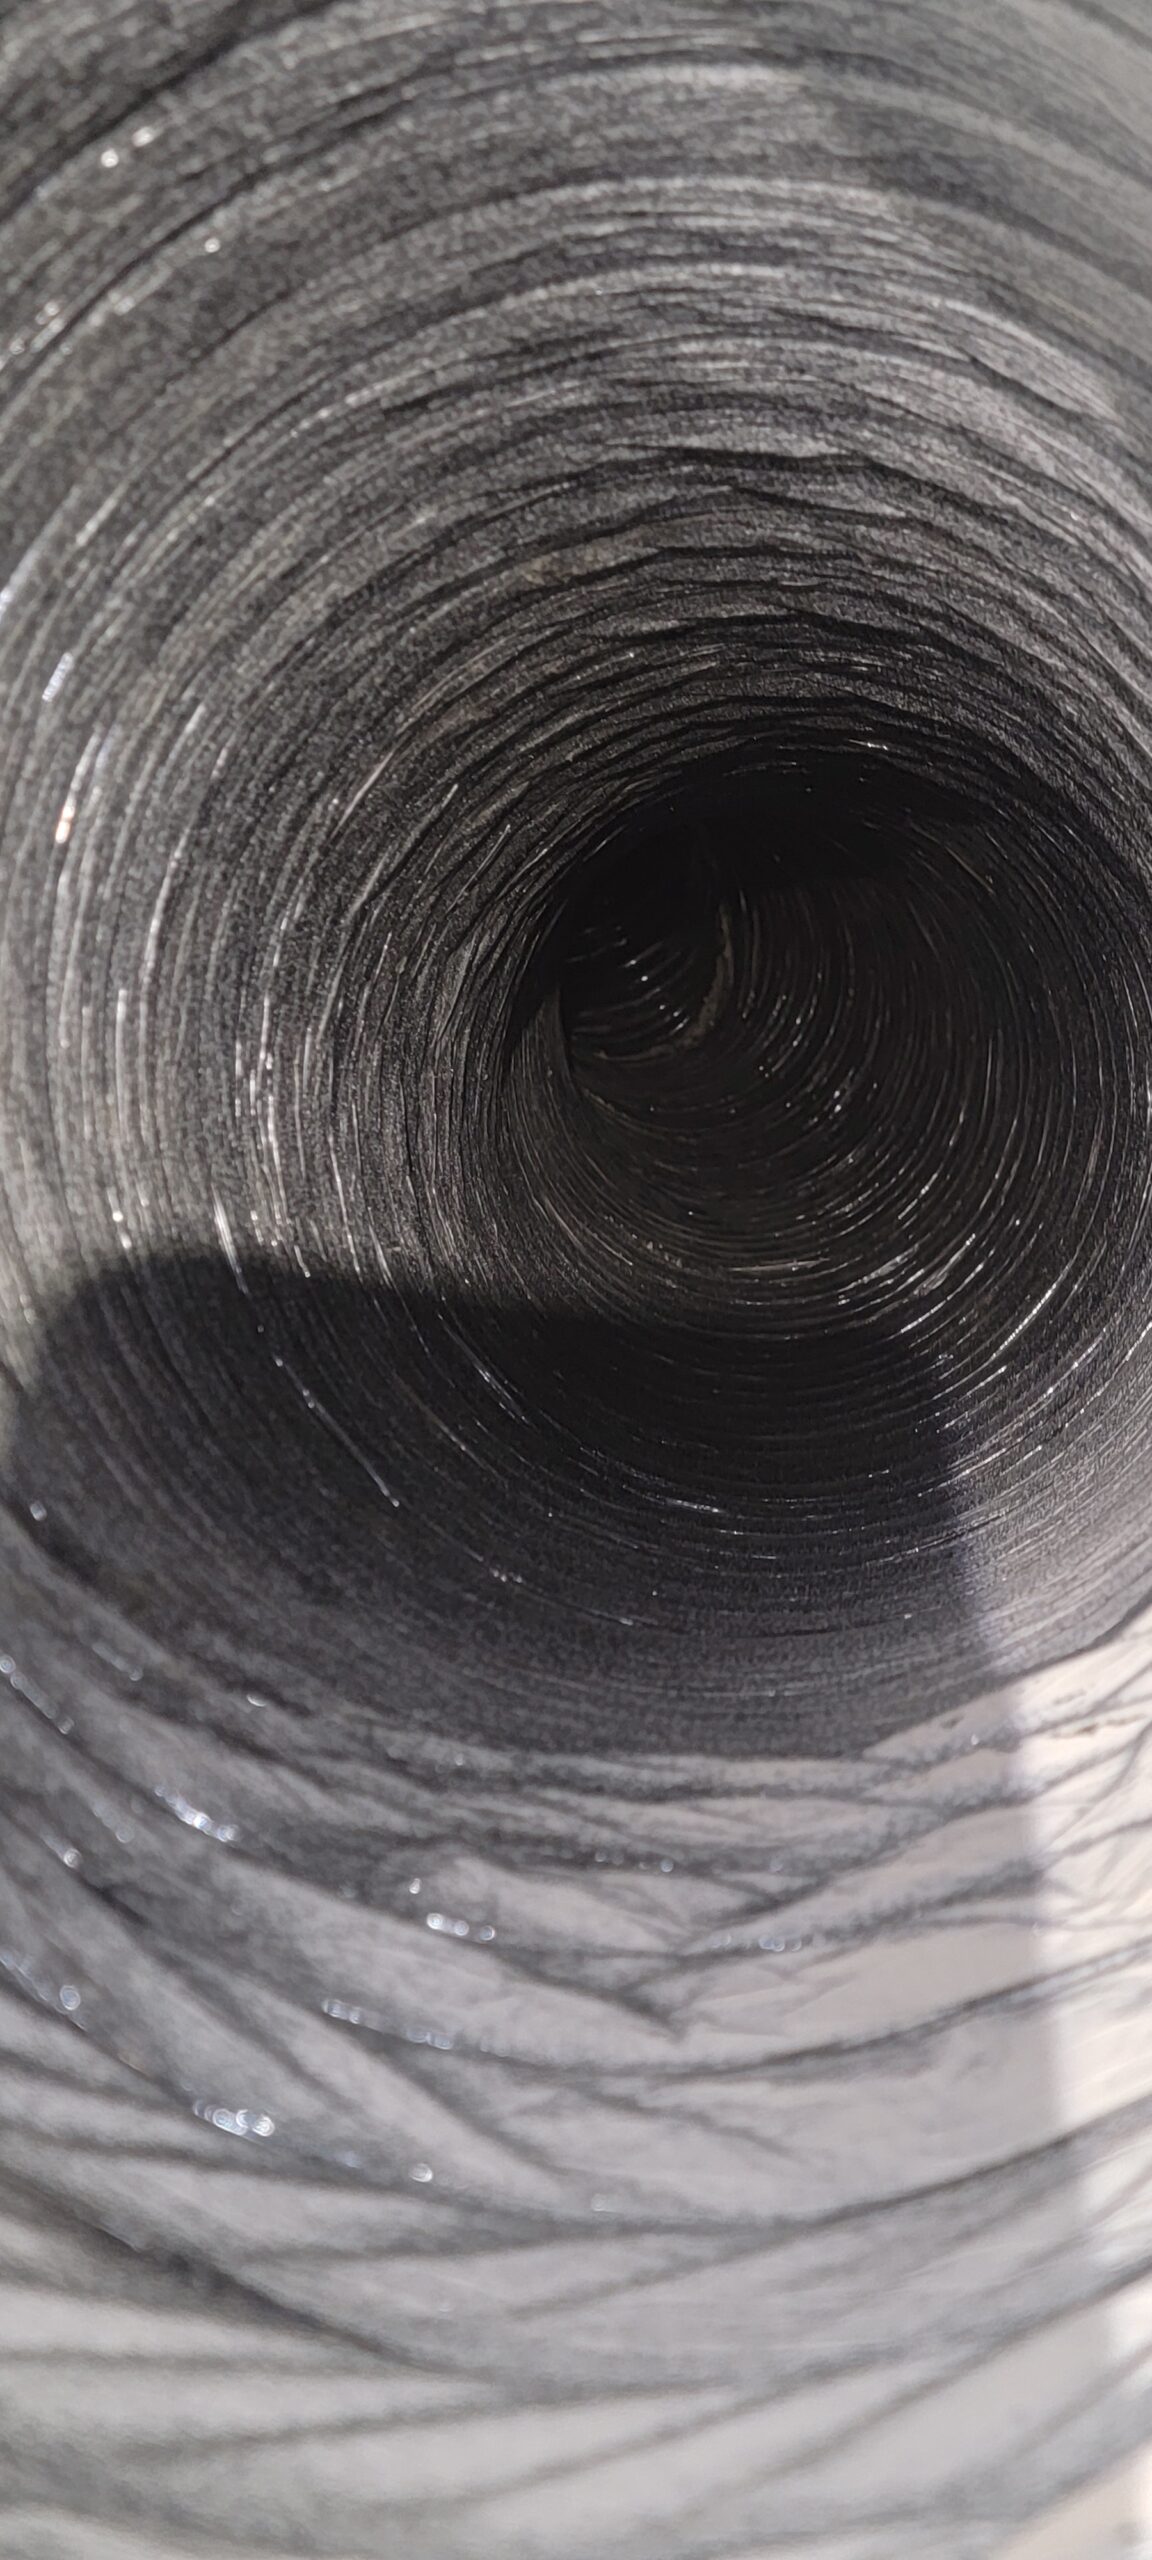 Dryer Vent Exhaust Cleaning